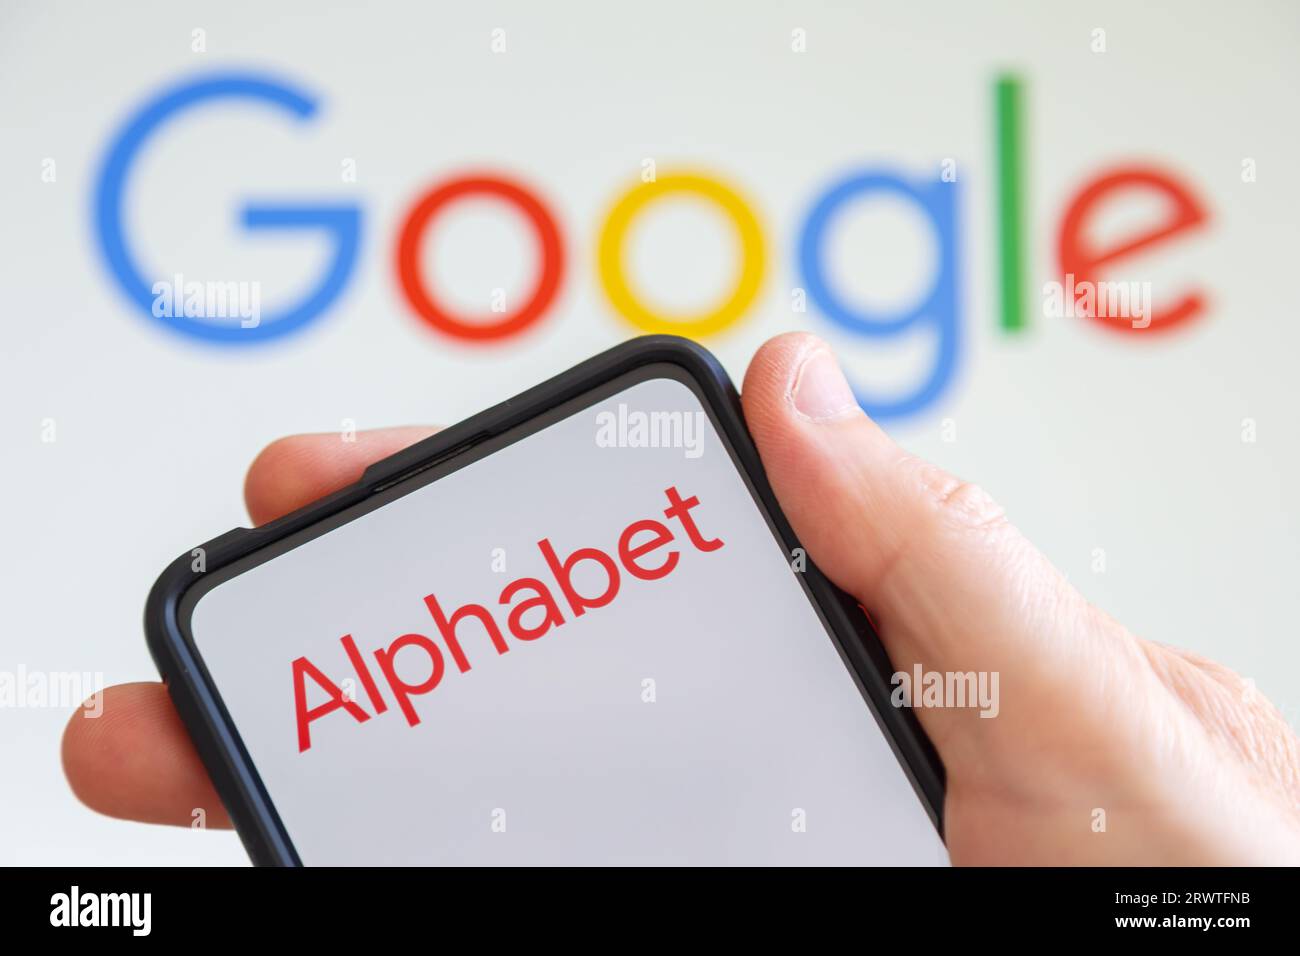 Stuttgart, Germany - July 20, 2023: Hand holding a mobile phone with Google and Alphabet logo of the computer hardware software manufacturer screen in Stock Photo